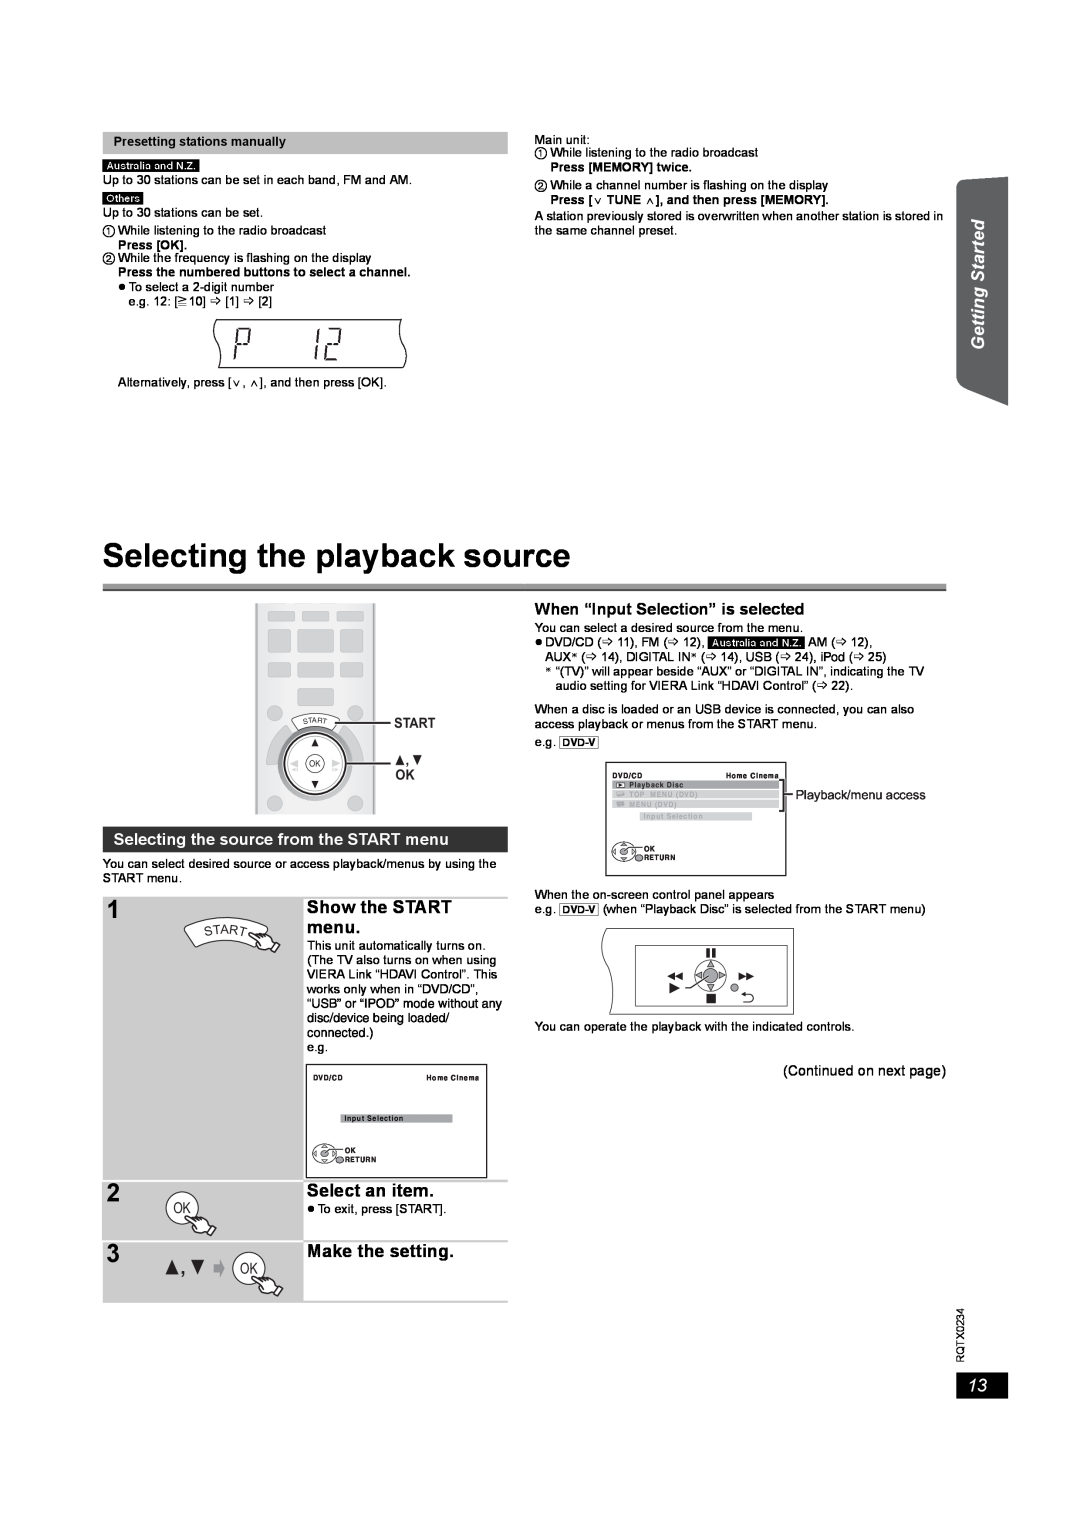 Panasonic SC-PT875 Selecting the playback source, Playing Discs, Operations, Other, Show the START menu, Select an item 